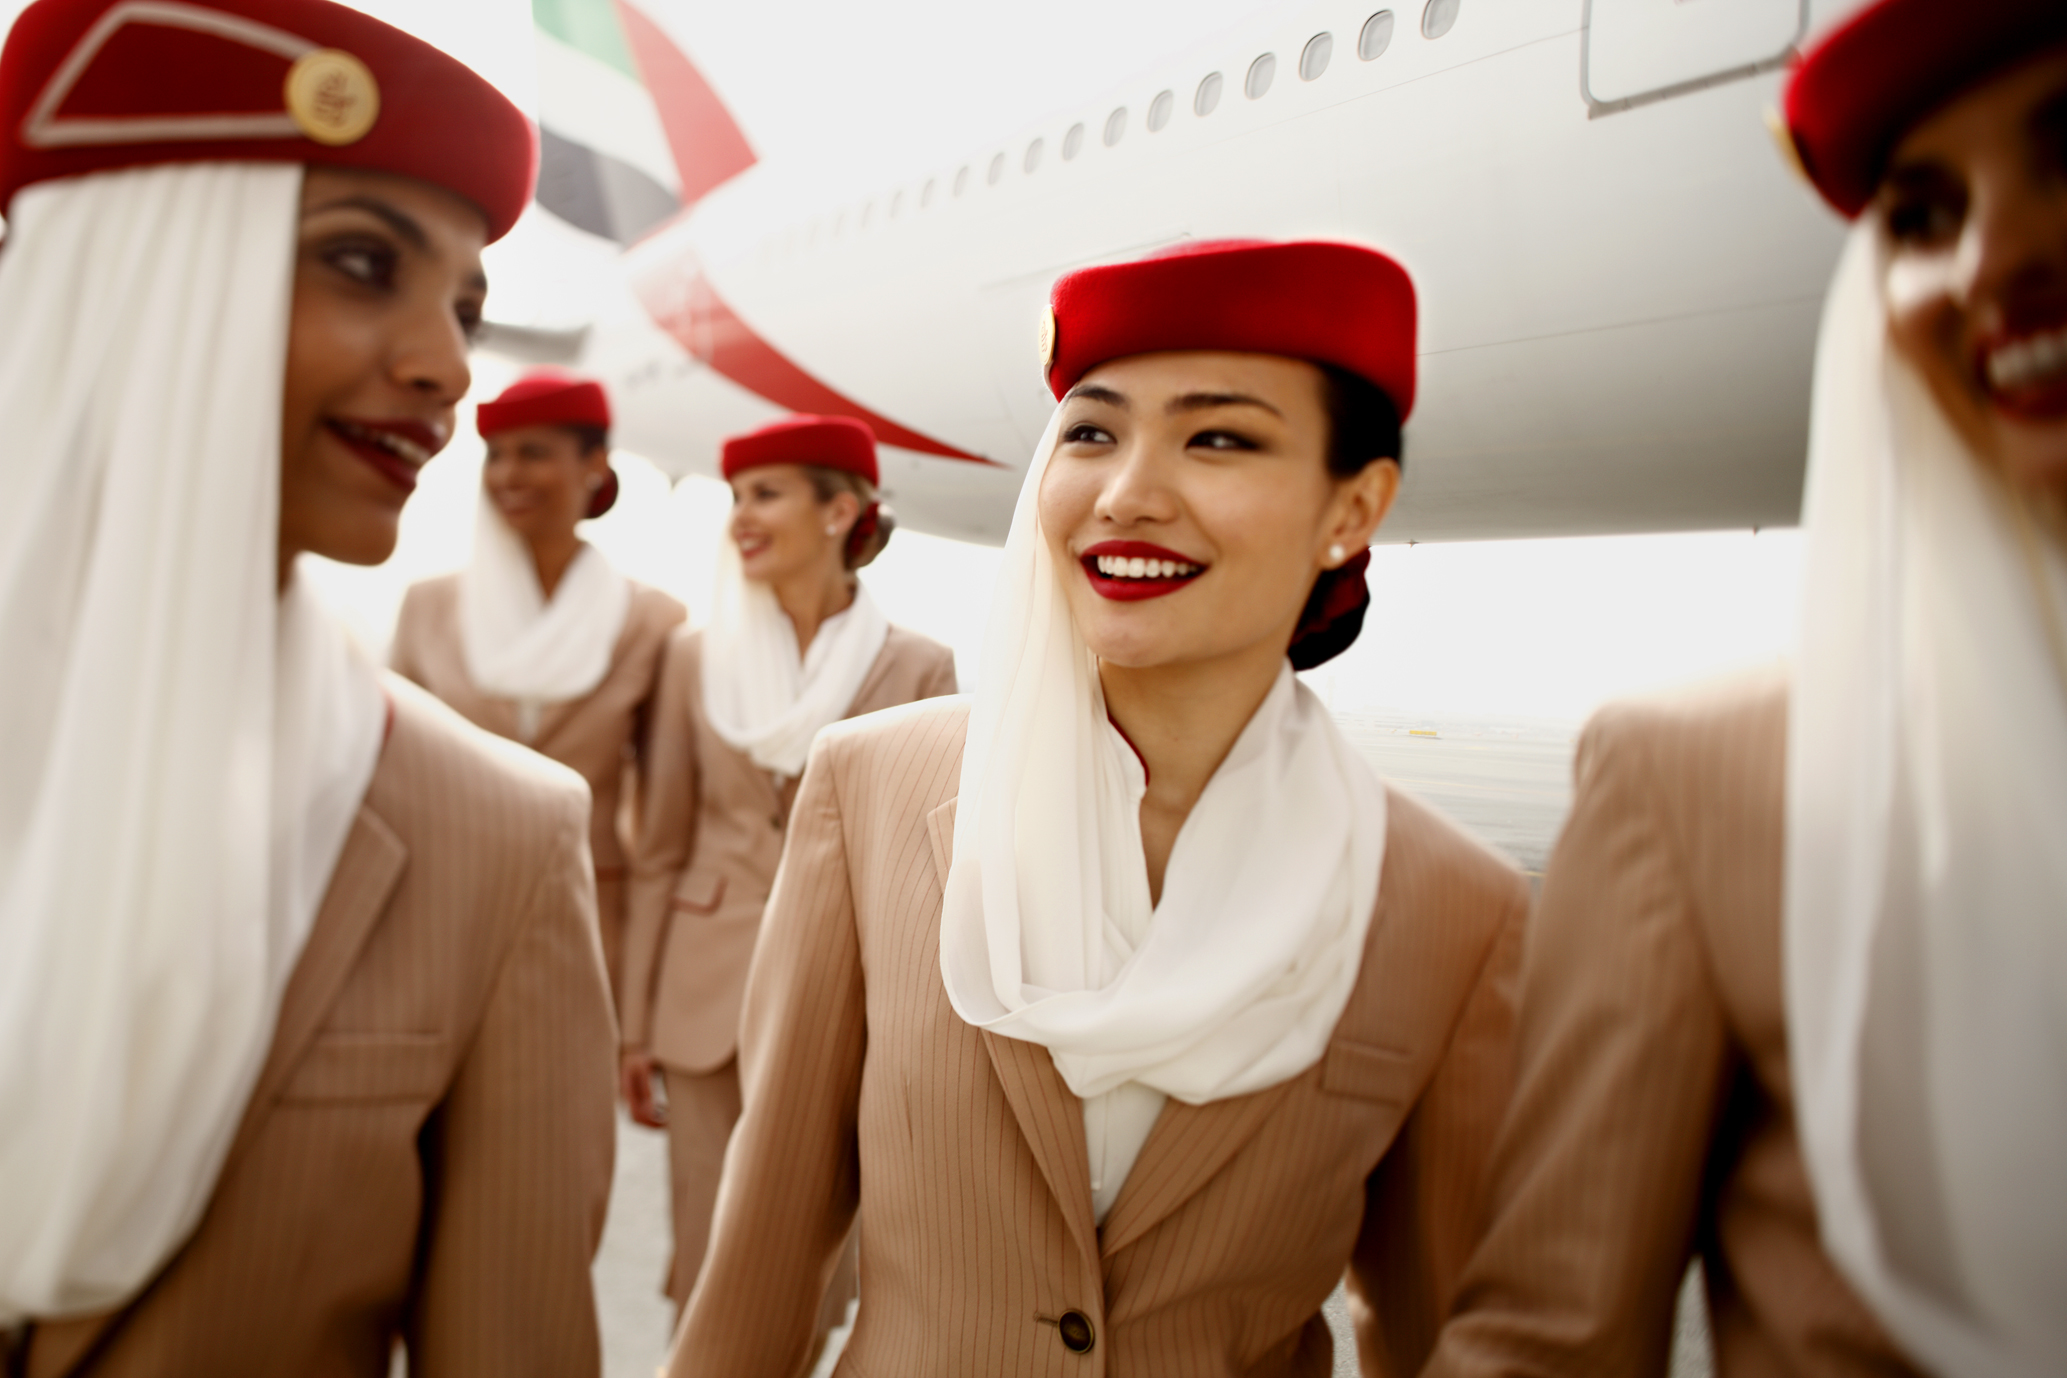 Emirates to Use Windows 8 Devices on Flights